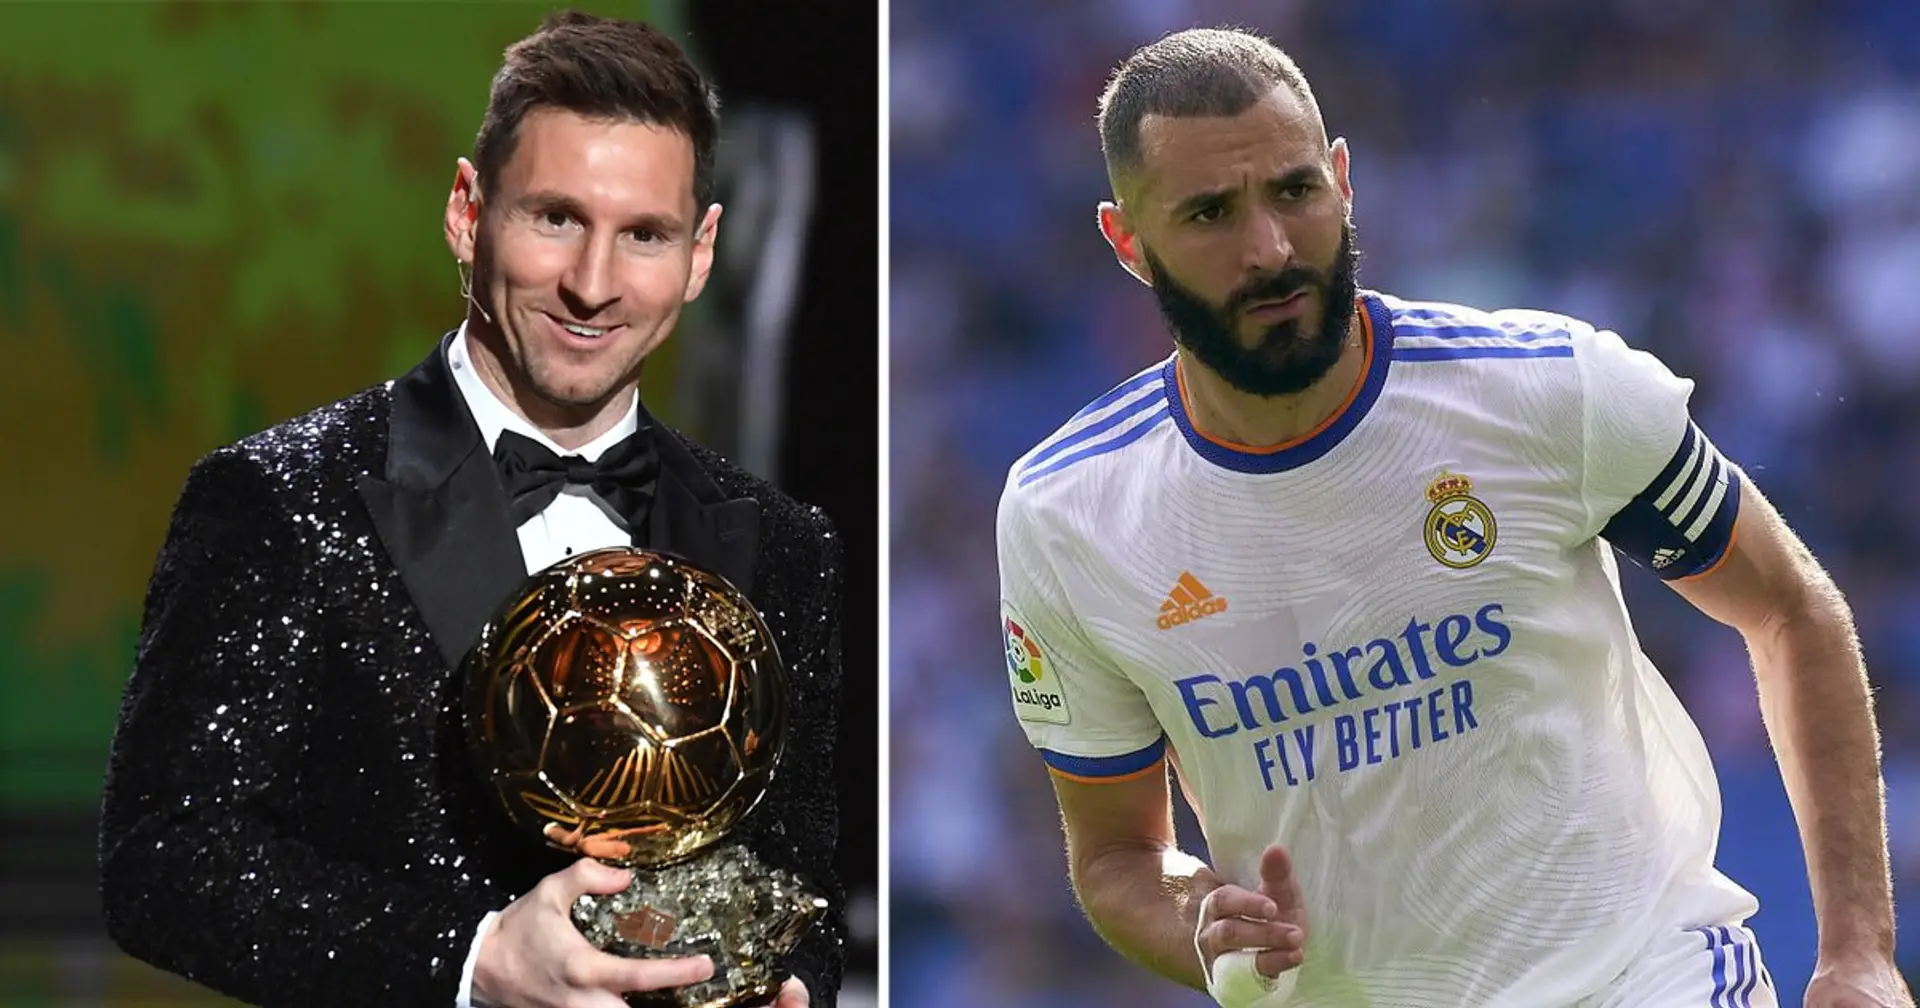 Messi wins, Benzema 4th: Ballon d'Or final voting results revealed